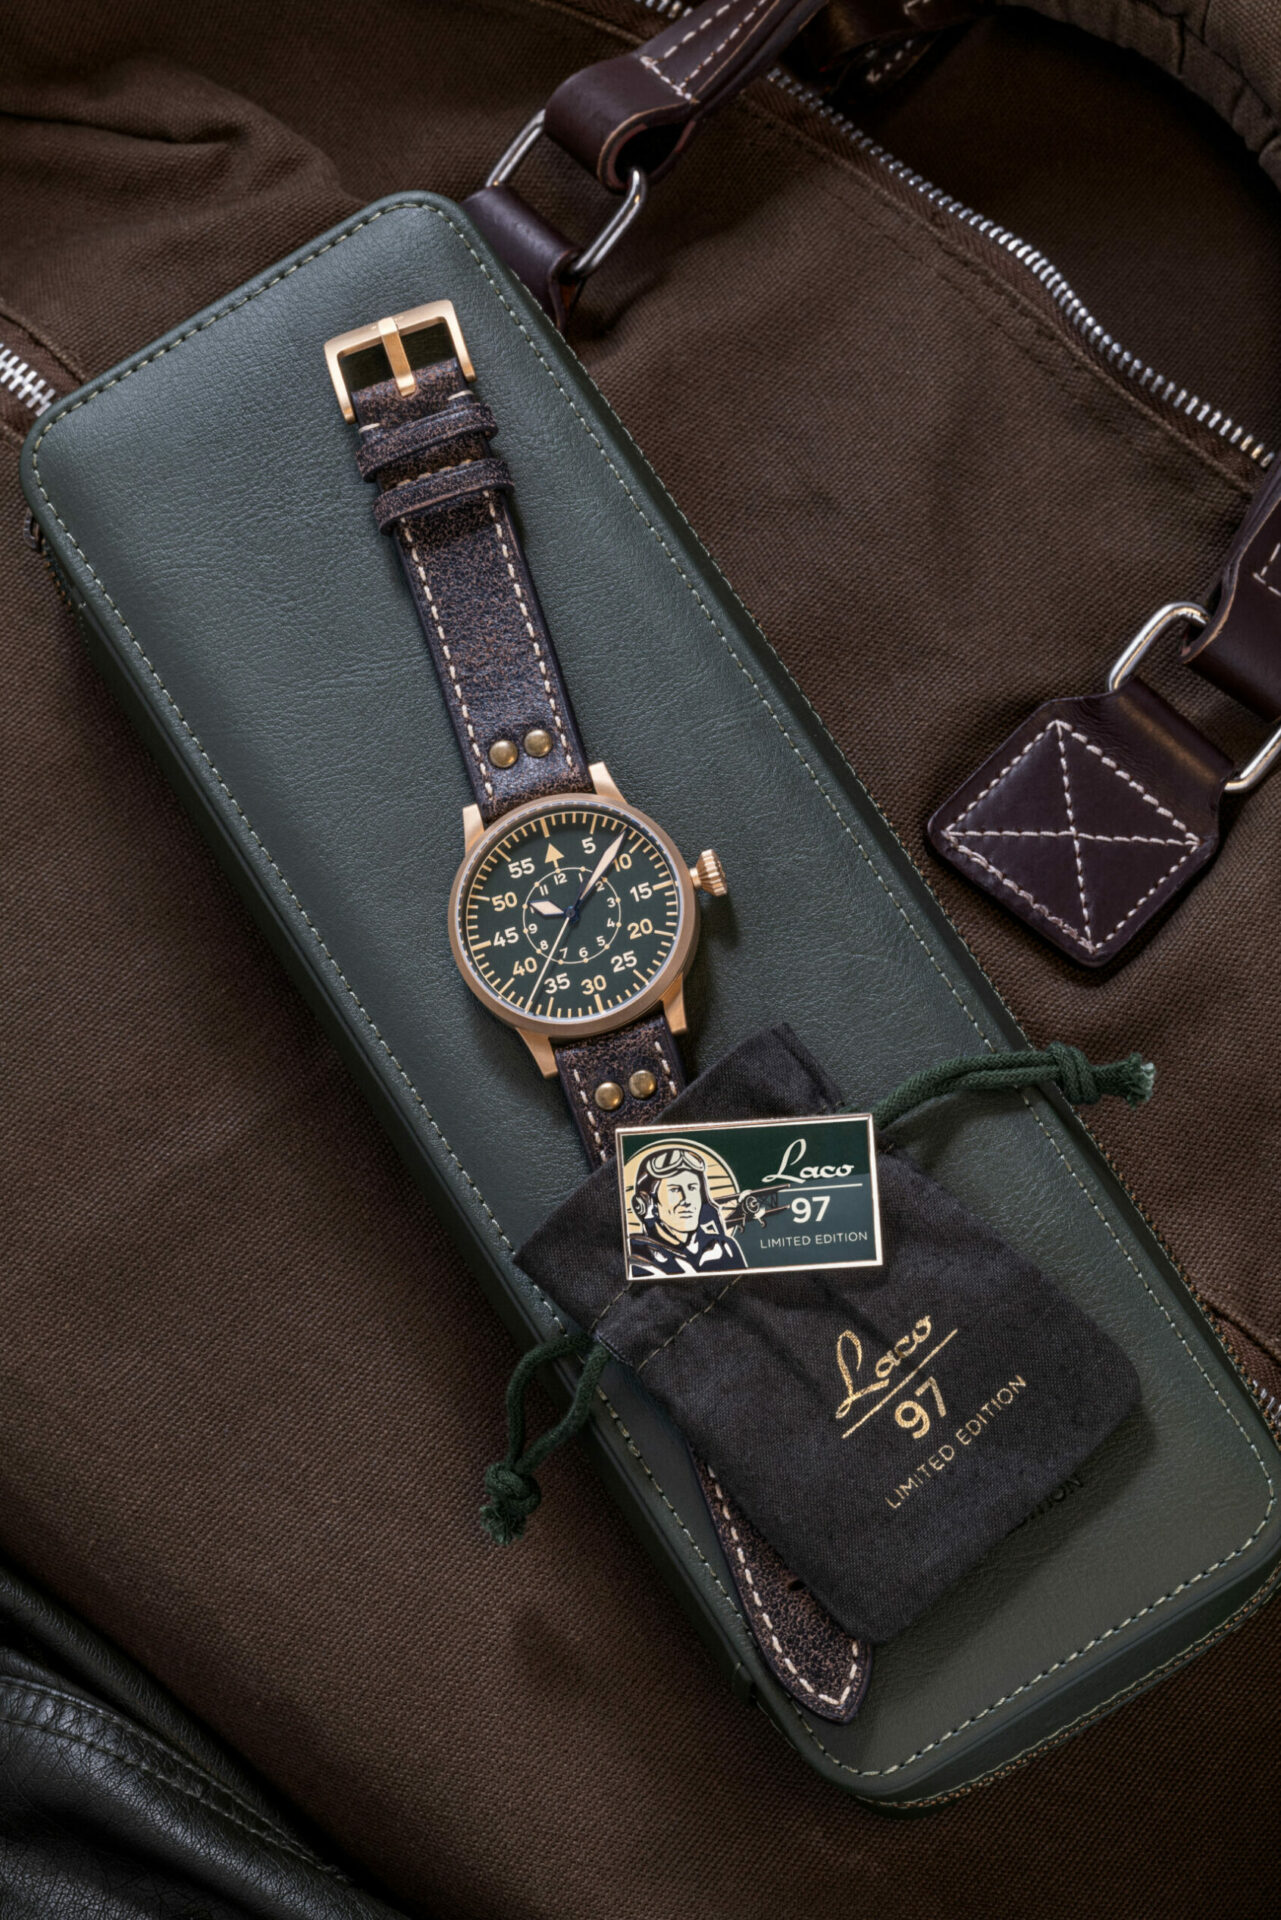 INTRODUCING: The Laco Edition 97 is a classic Type B pilot’s watch in bronze